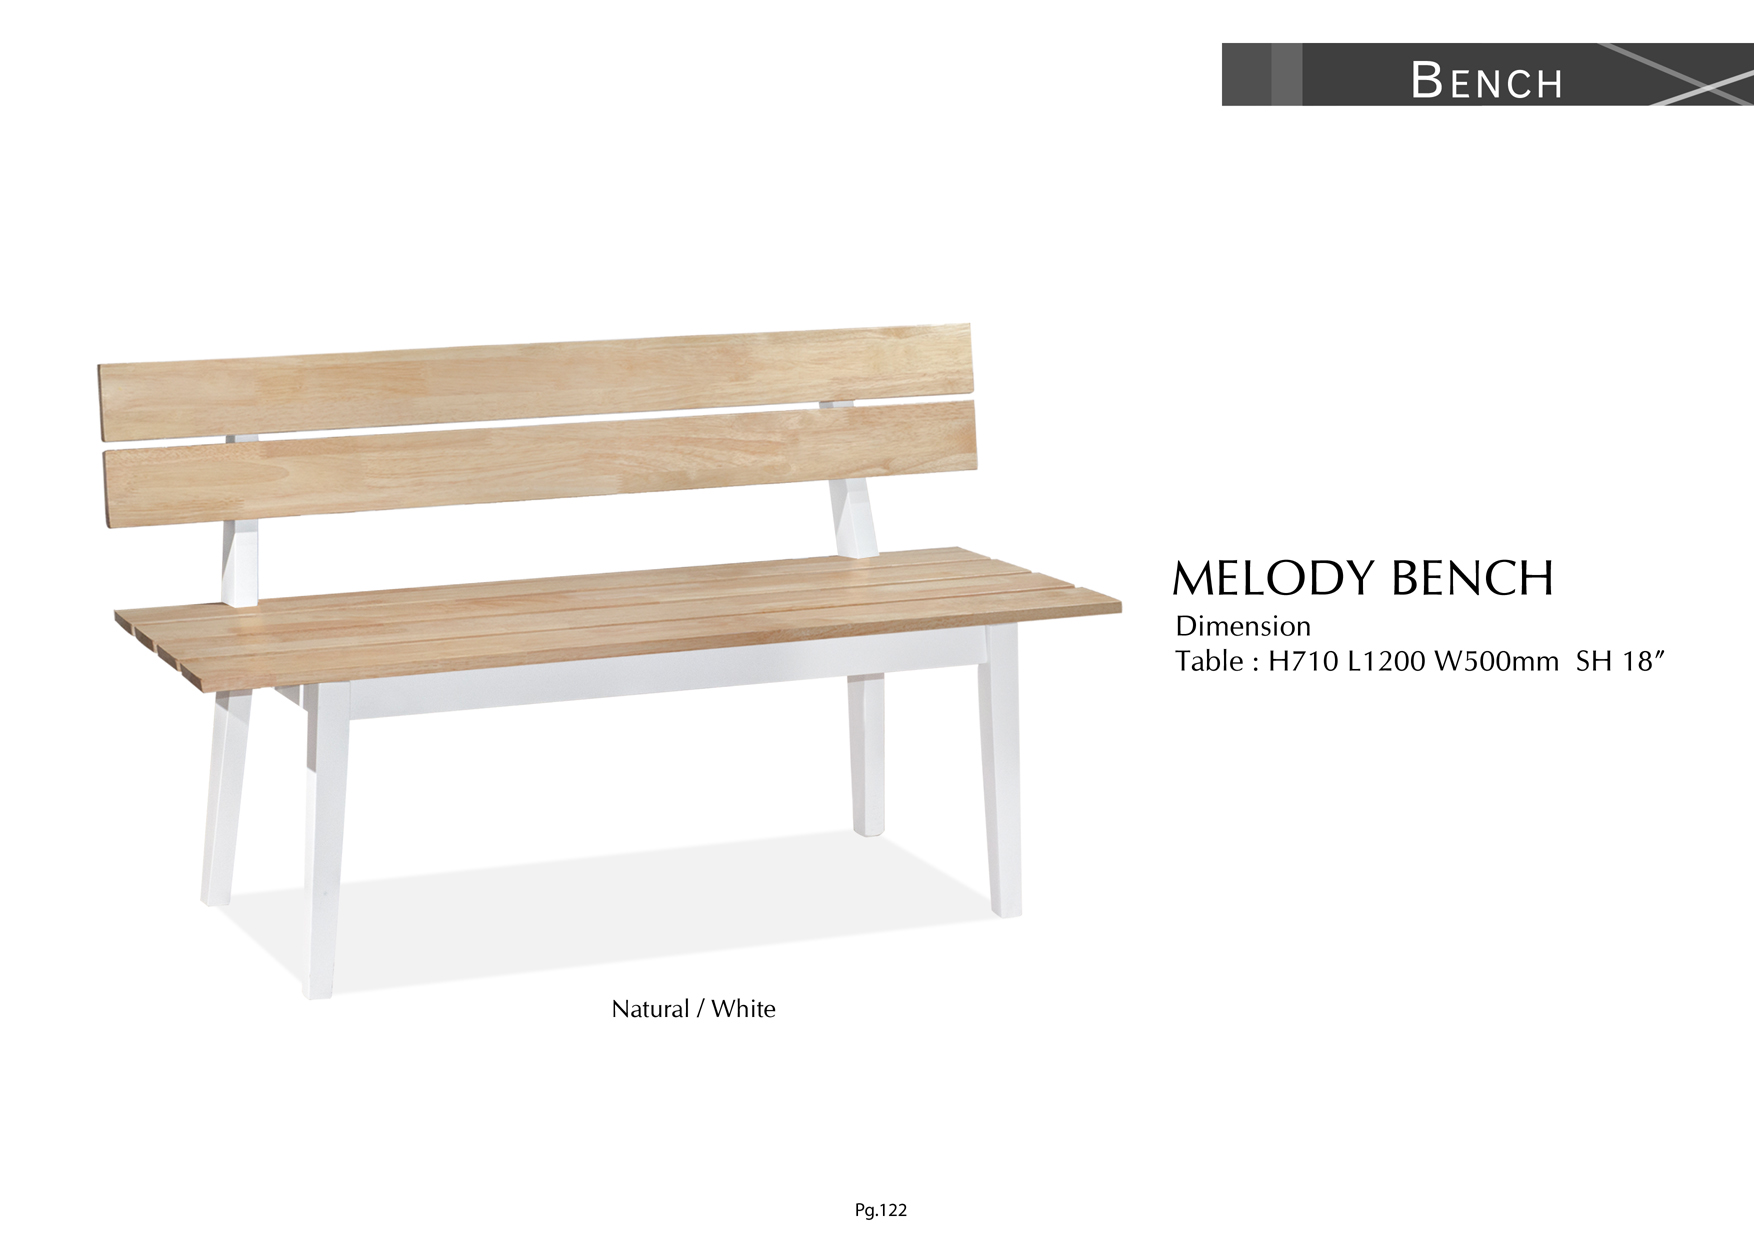 Product: PG122. MELODY BENCH